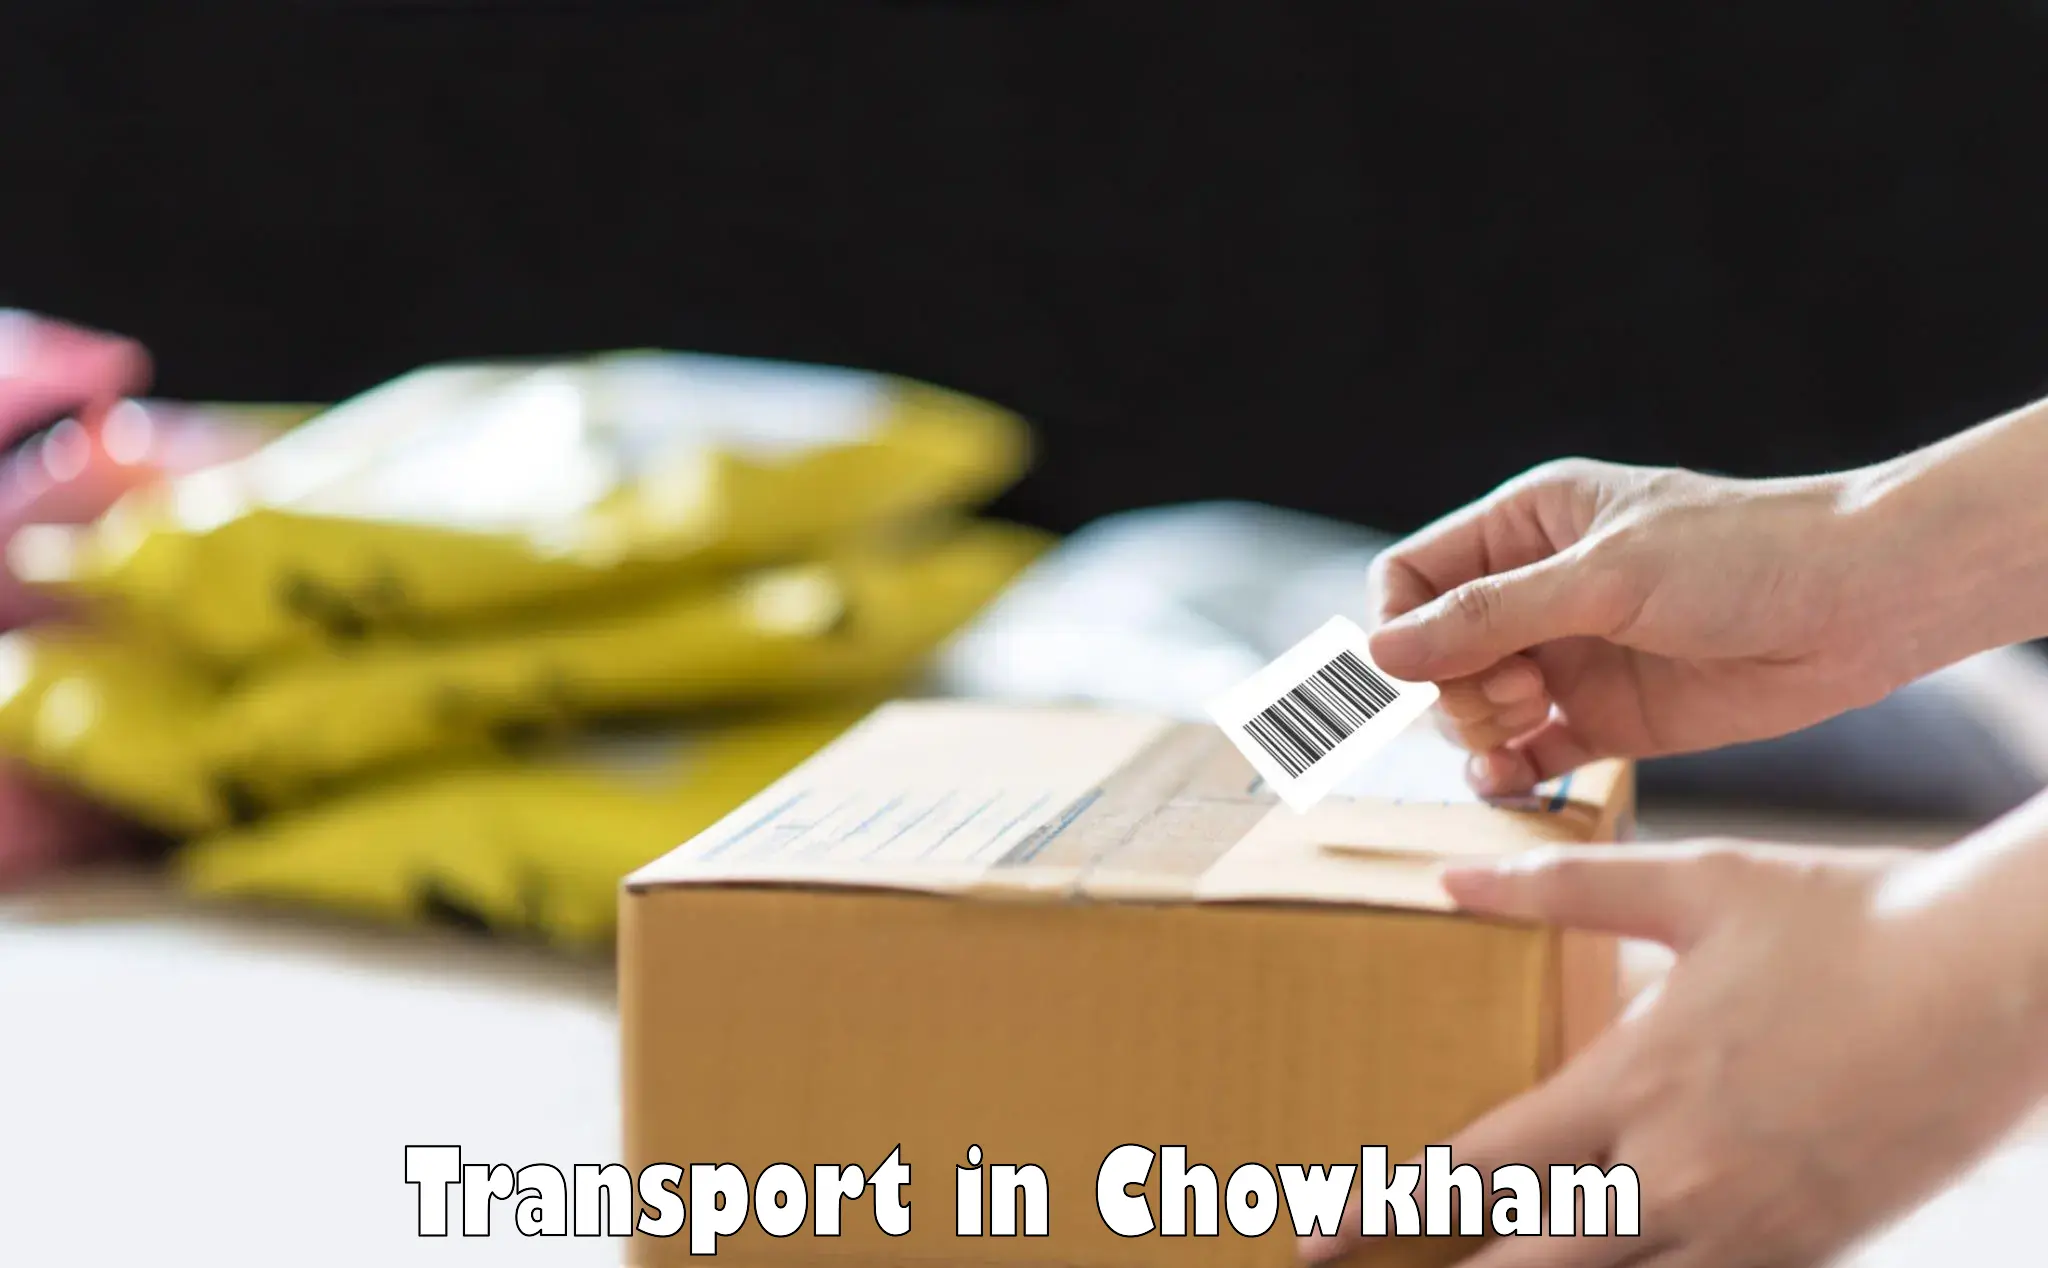 Express transport services in Chowkham